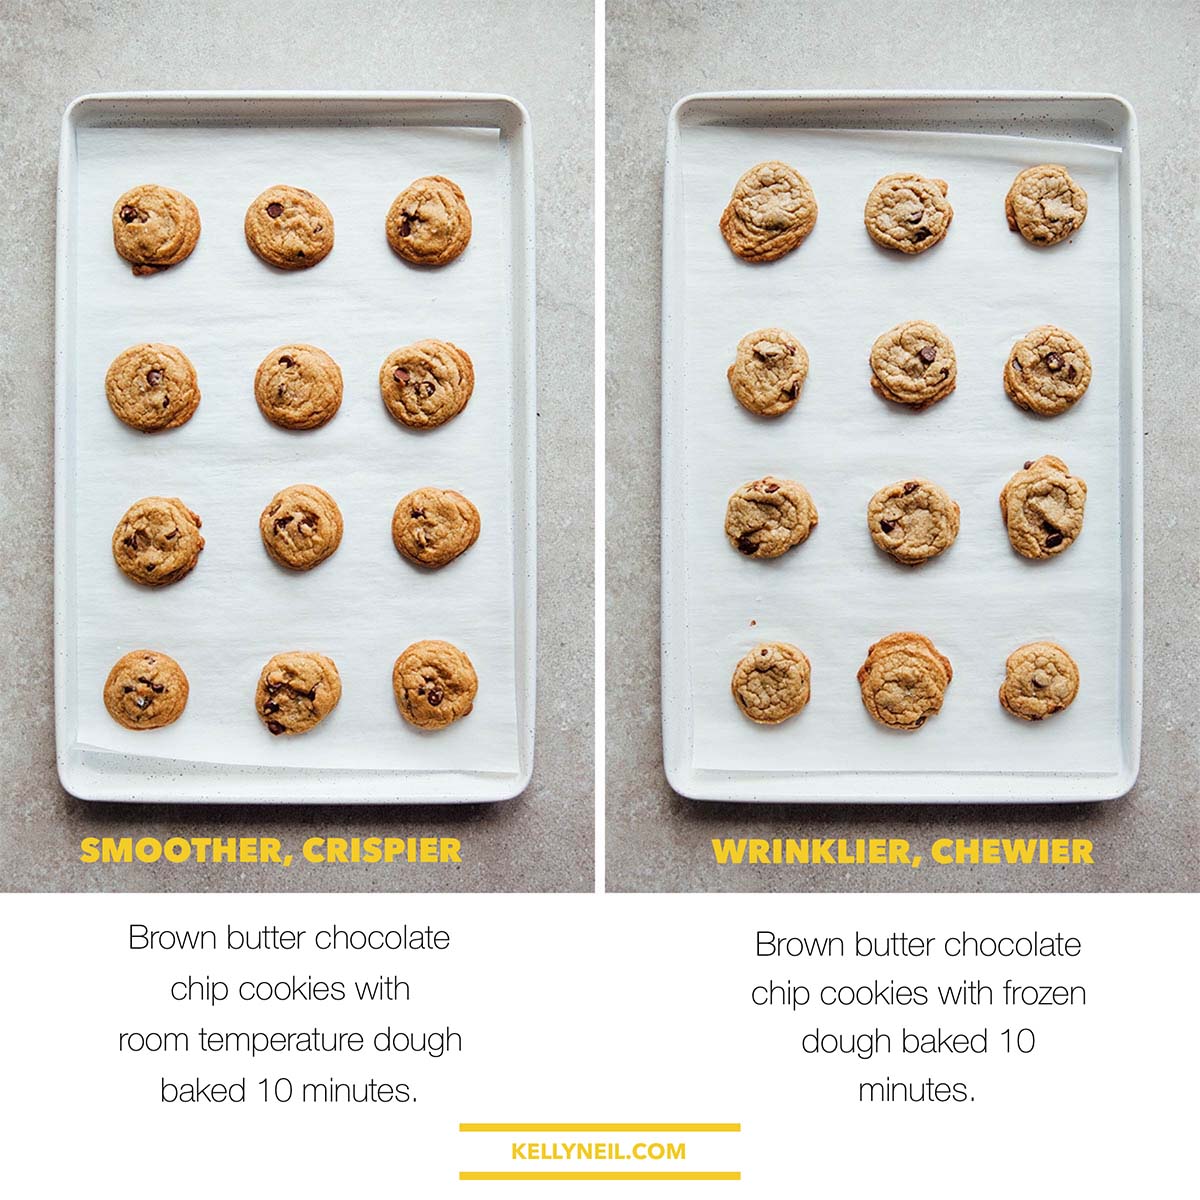 A side by side comparison of cookies baked with room temperature dough, and frozen dough.